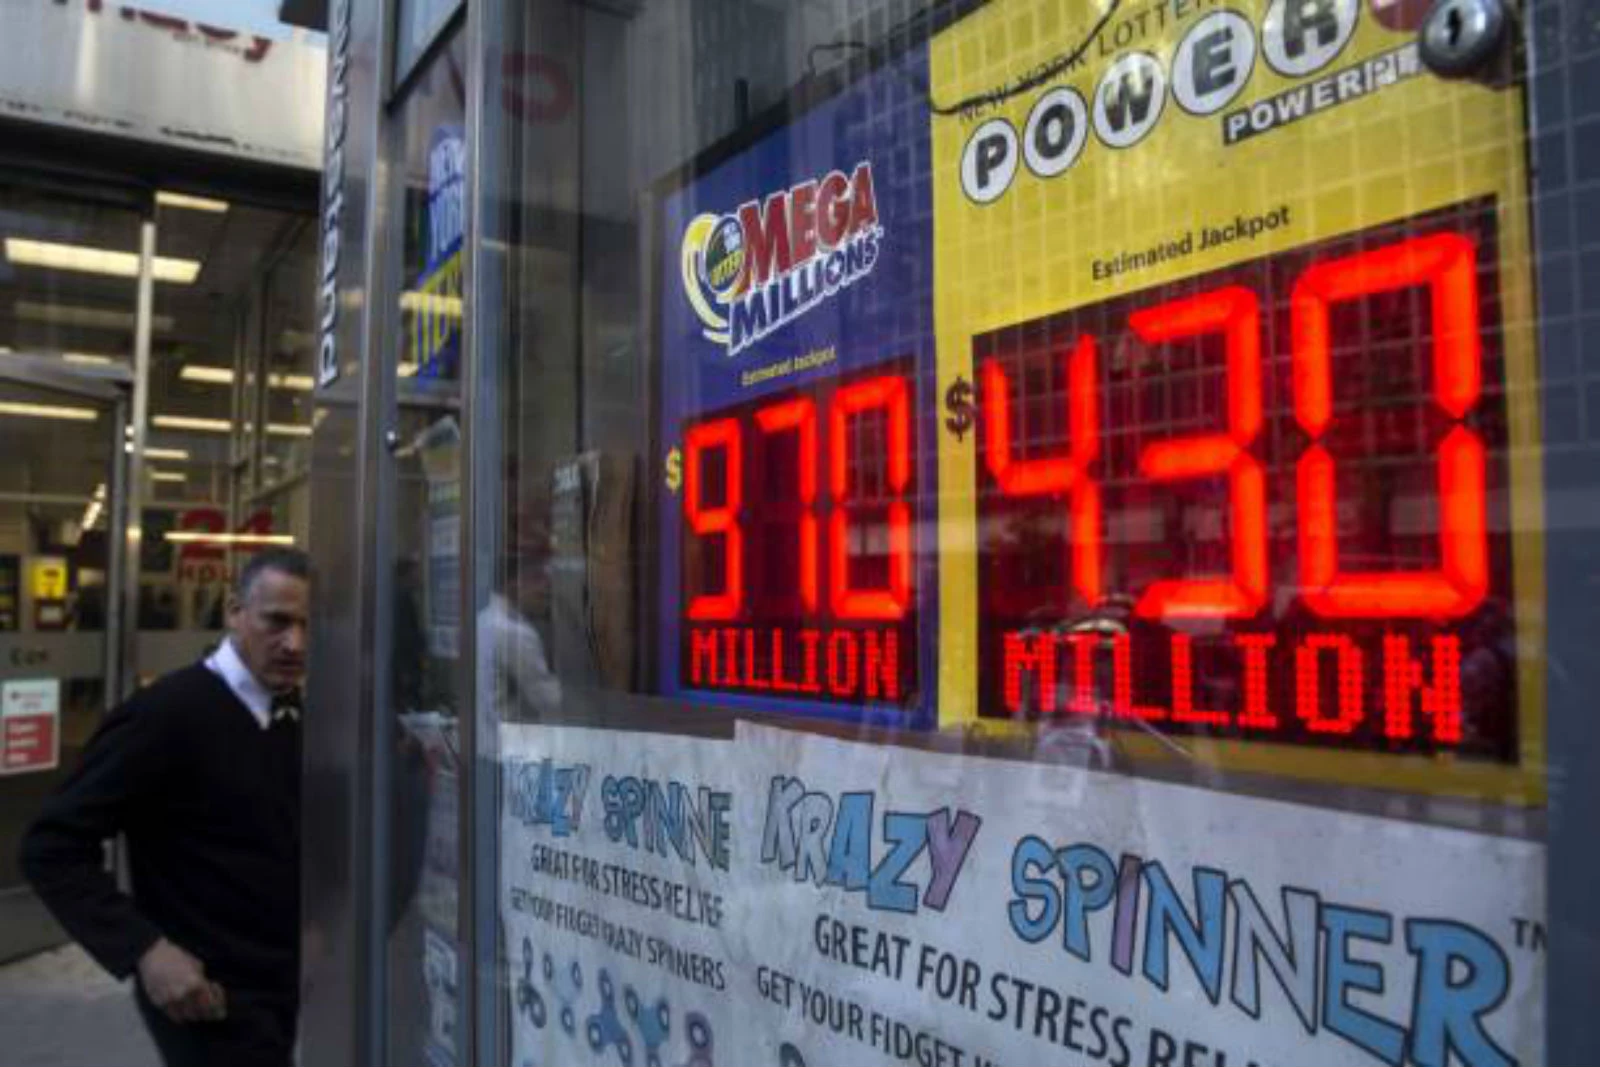 powerball current jackpot august 2024